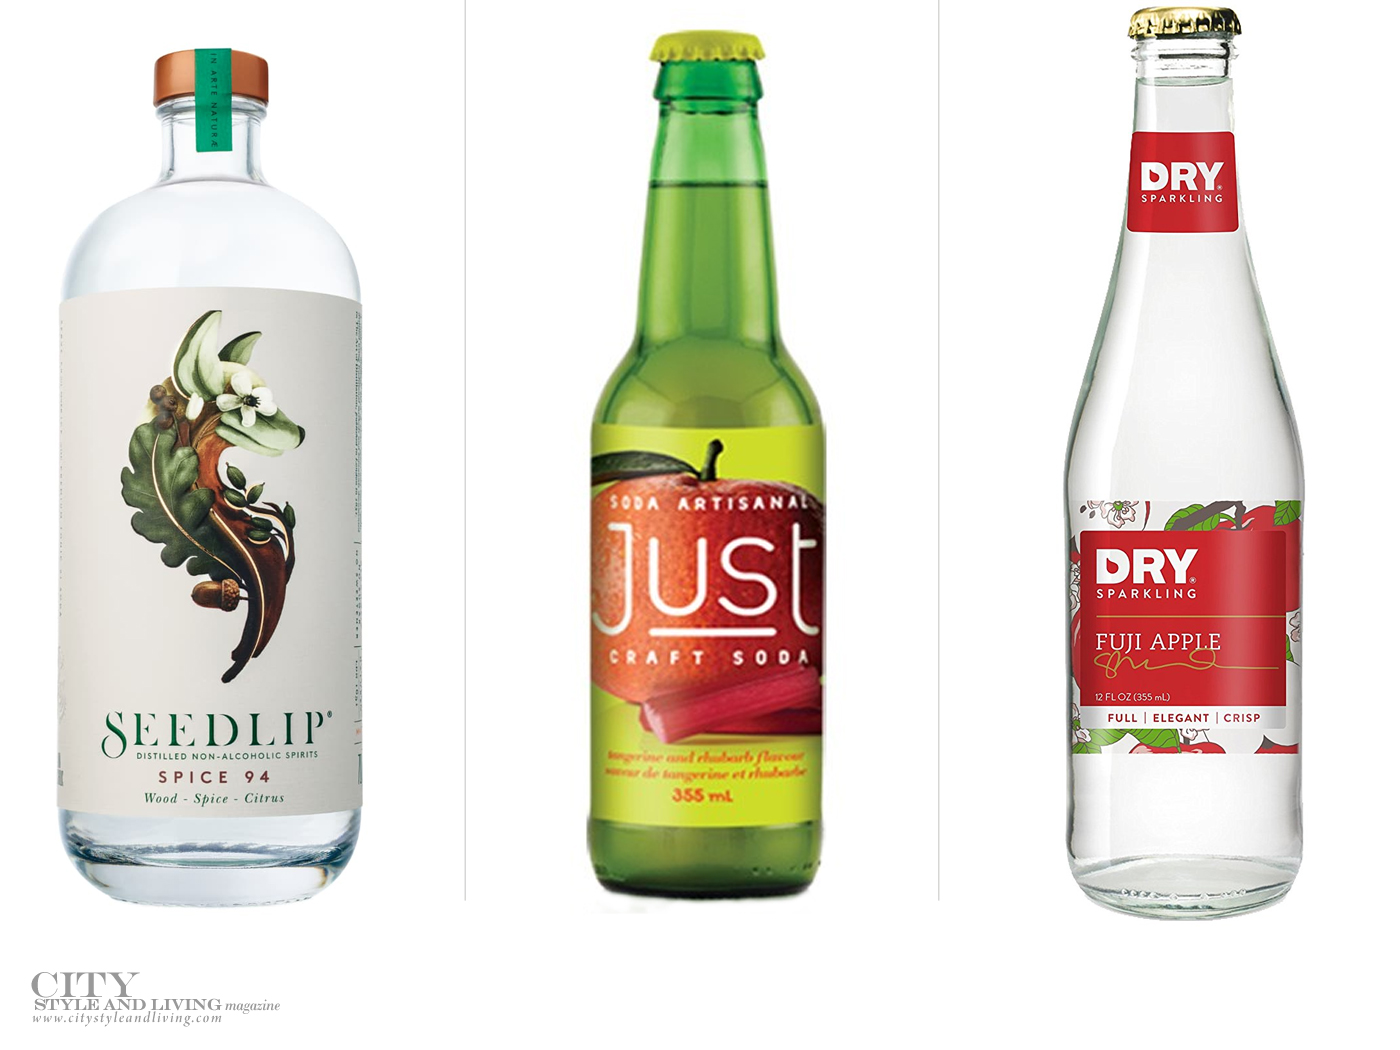 City Style and Living Magazine wines and spirits Summer 2018 non alcoholic beverages